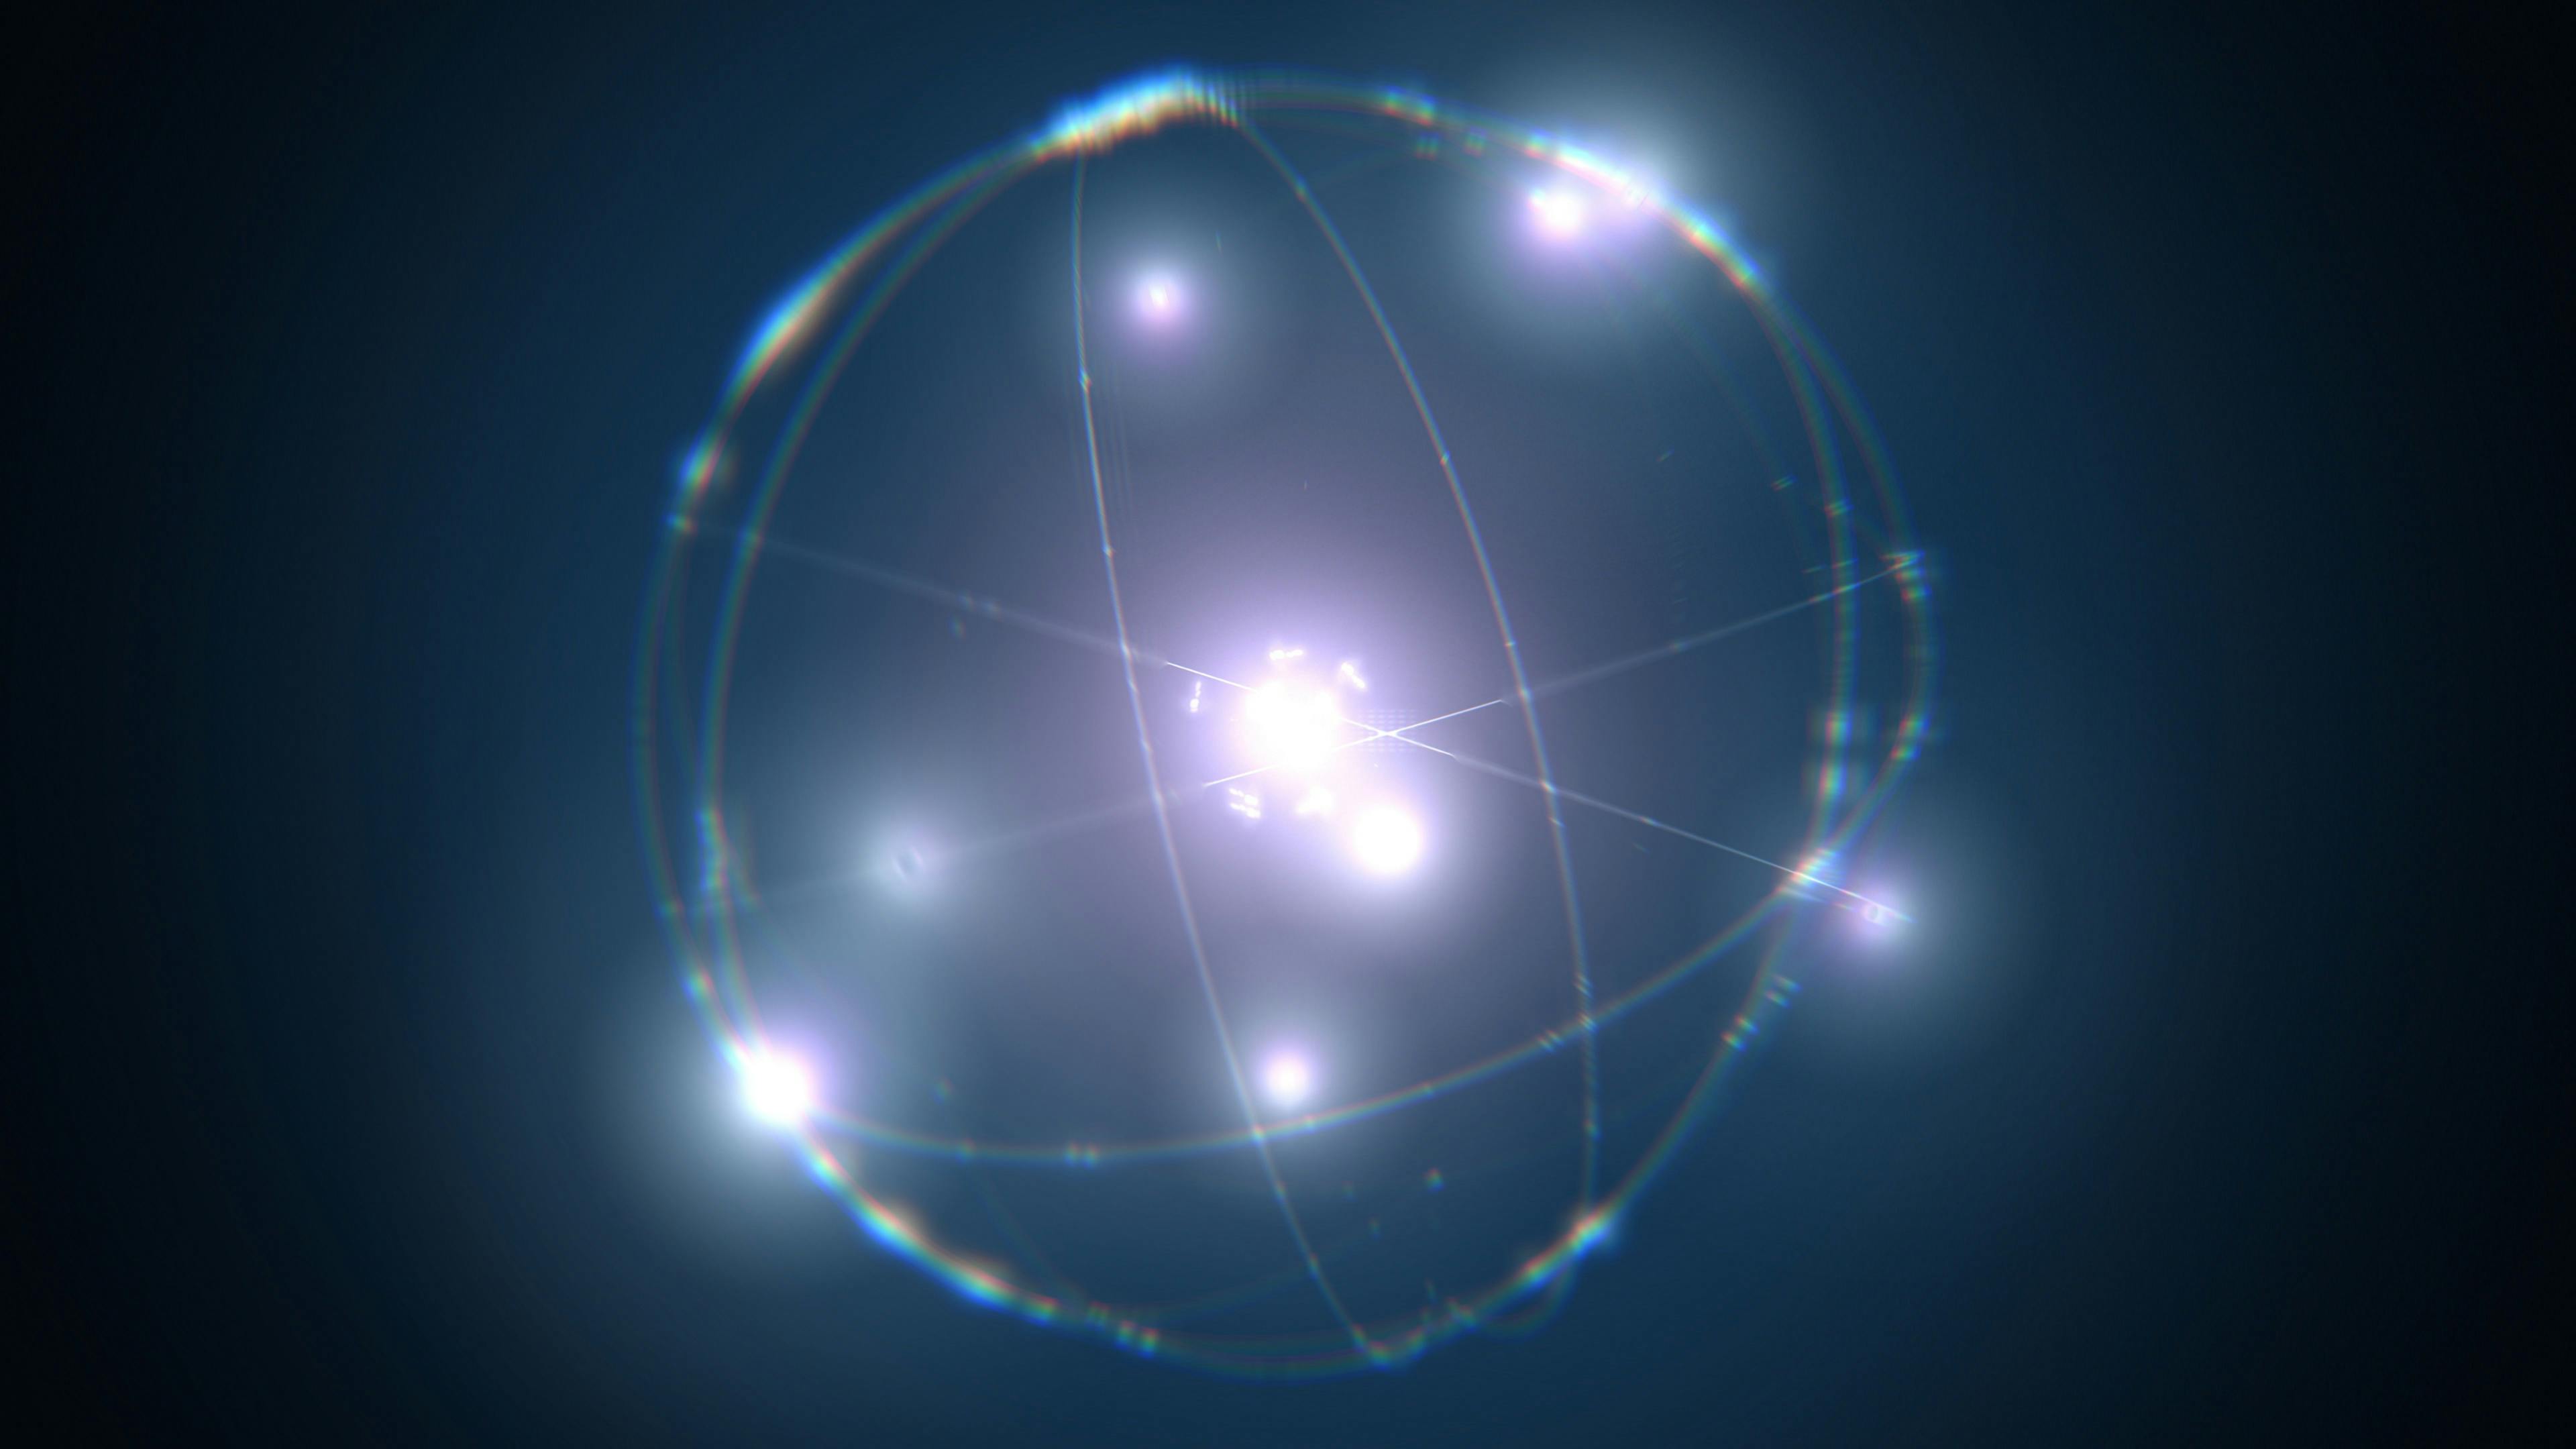 Dynamic energetic blue atom model concept illustration of glowing proton neutron nucleus, visualization of atom space physics of centric gravity as idea of electrons orbiting as ordered particles | Image Credit: © remotevfx - stock.adobe.com